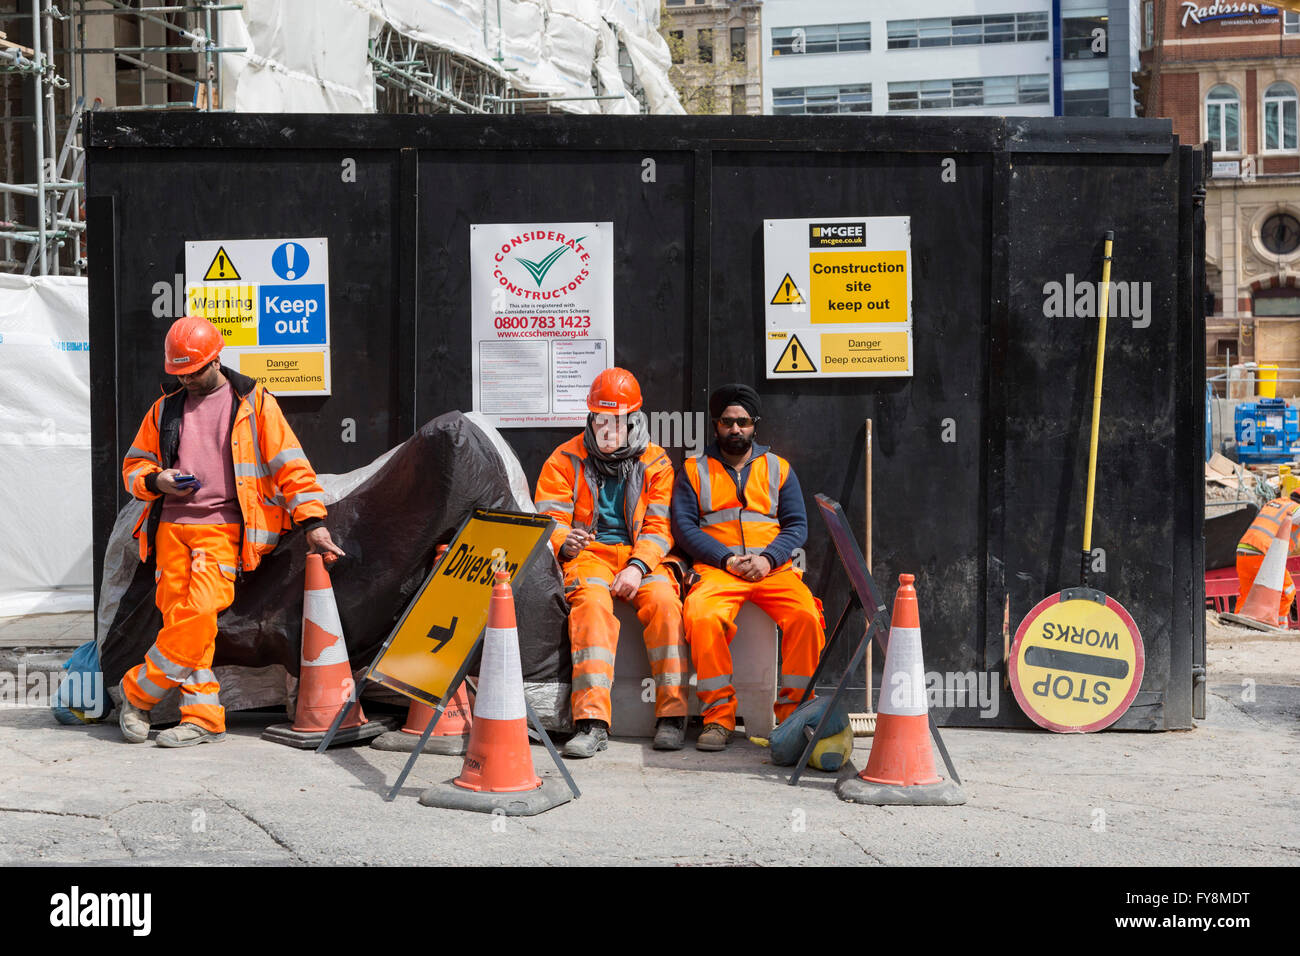 Building workers in high viz jackets and trousers on a break, London, England, United Kingdom Stock Photo